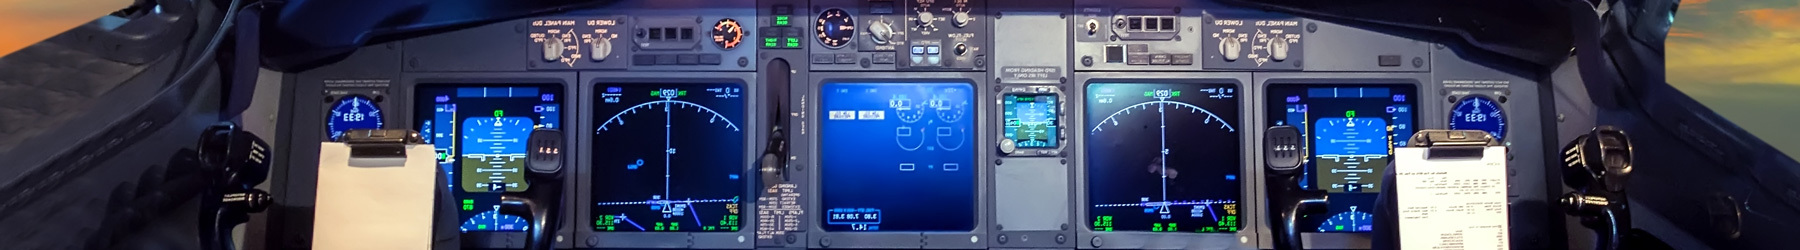 Advanced flight deck with electronic displays and controls at dusk.